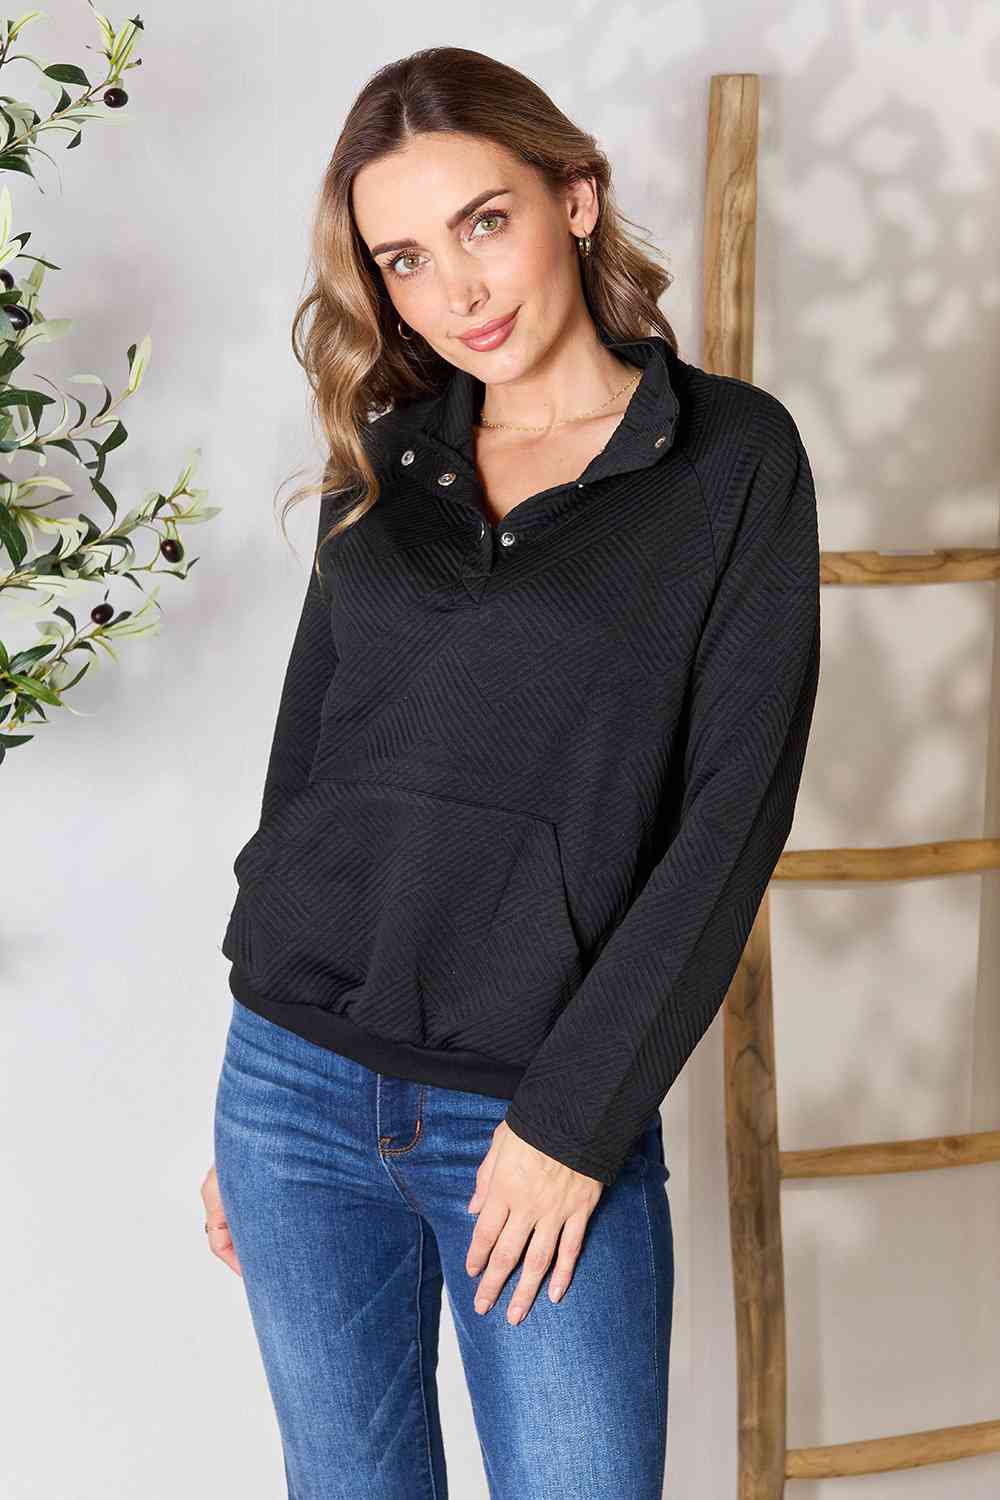 Double Take Half Buttoned Collared Neck Sweatshirt with Pocket - Everyday-Sales.com